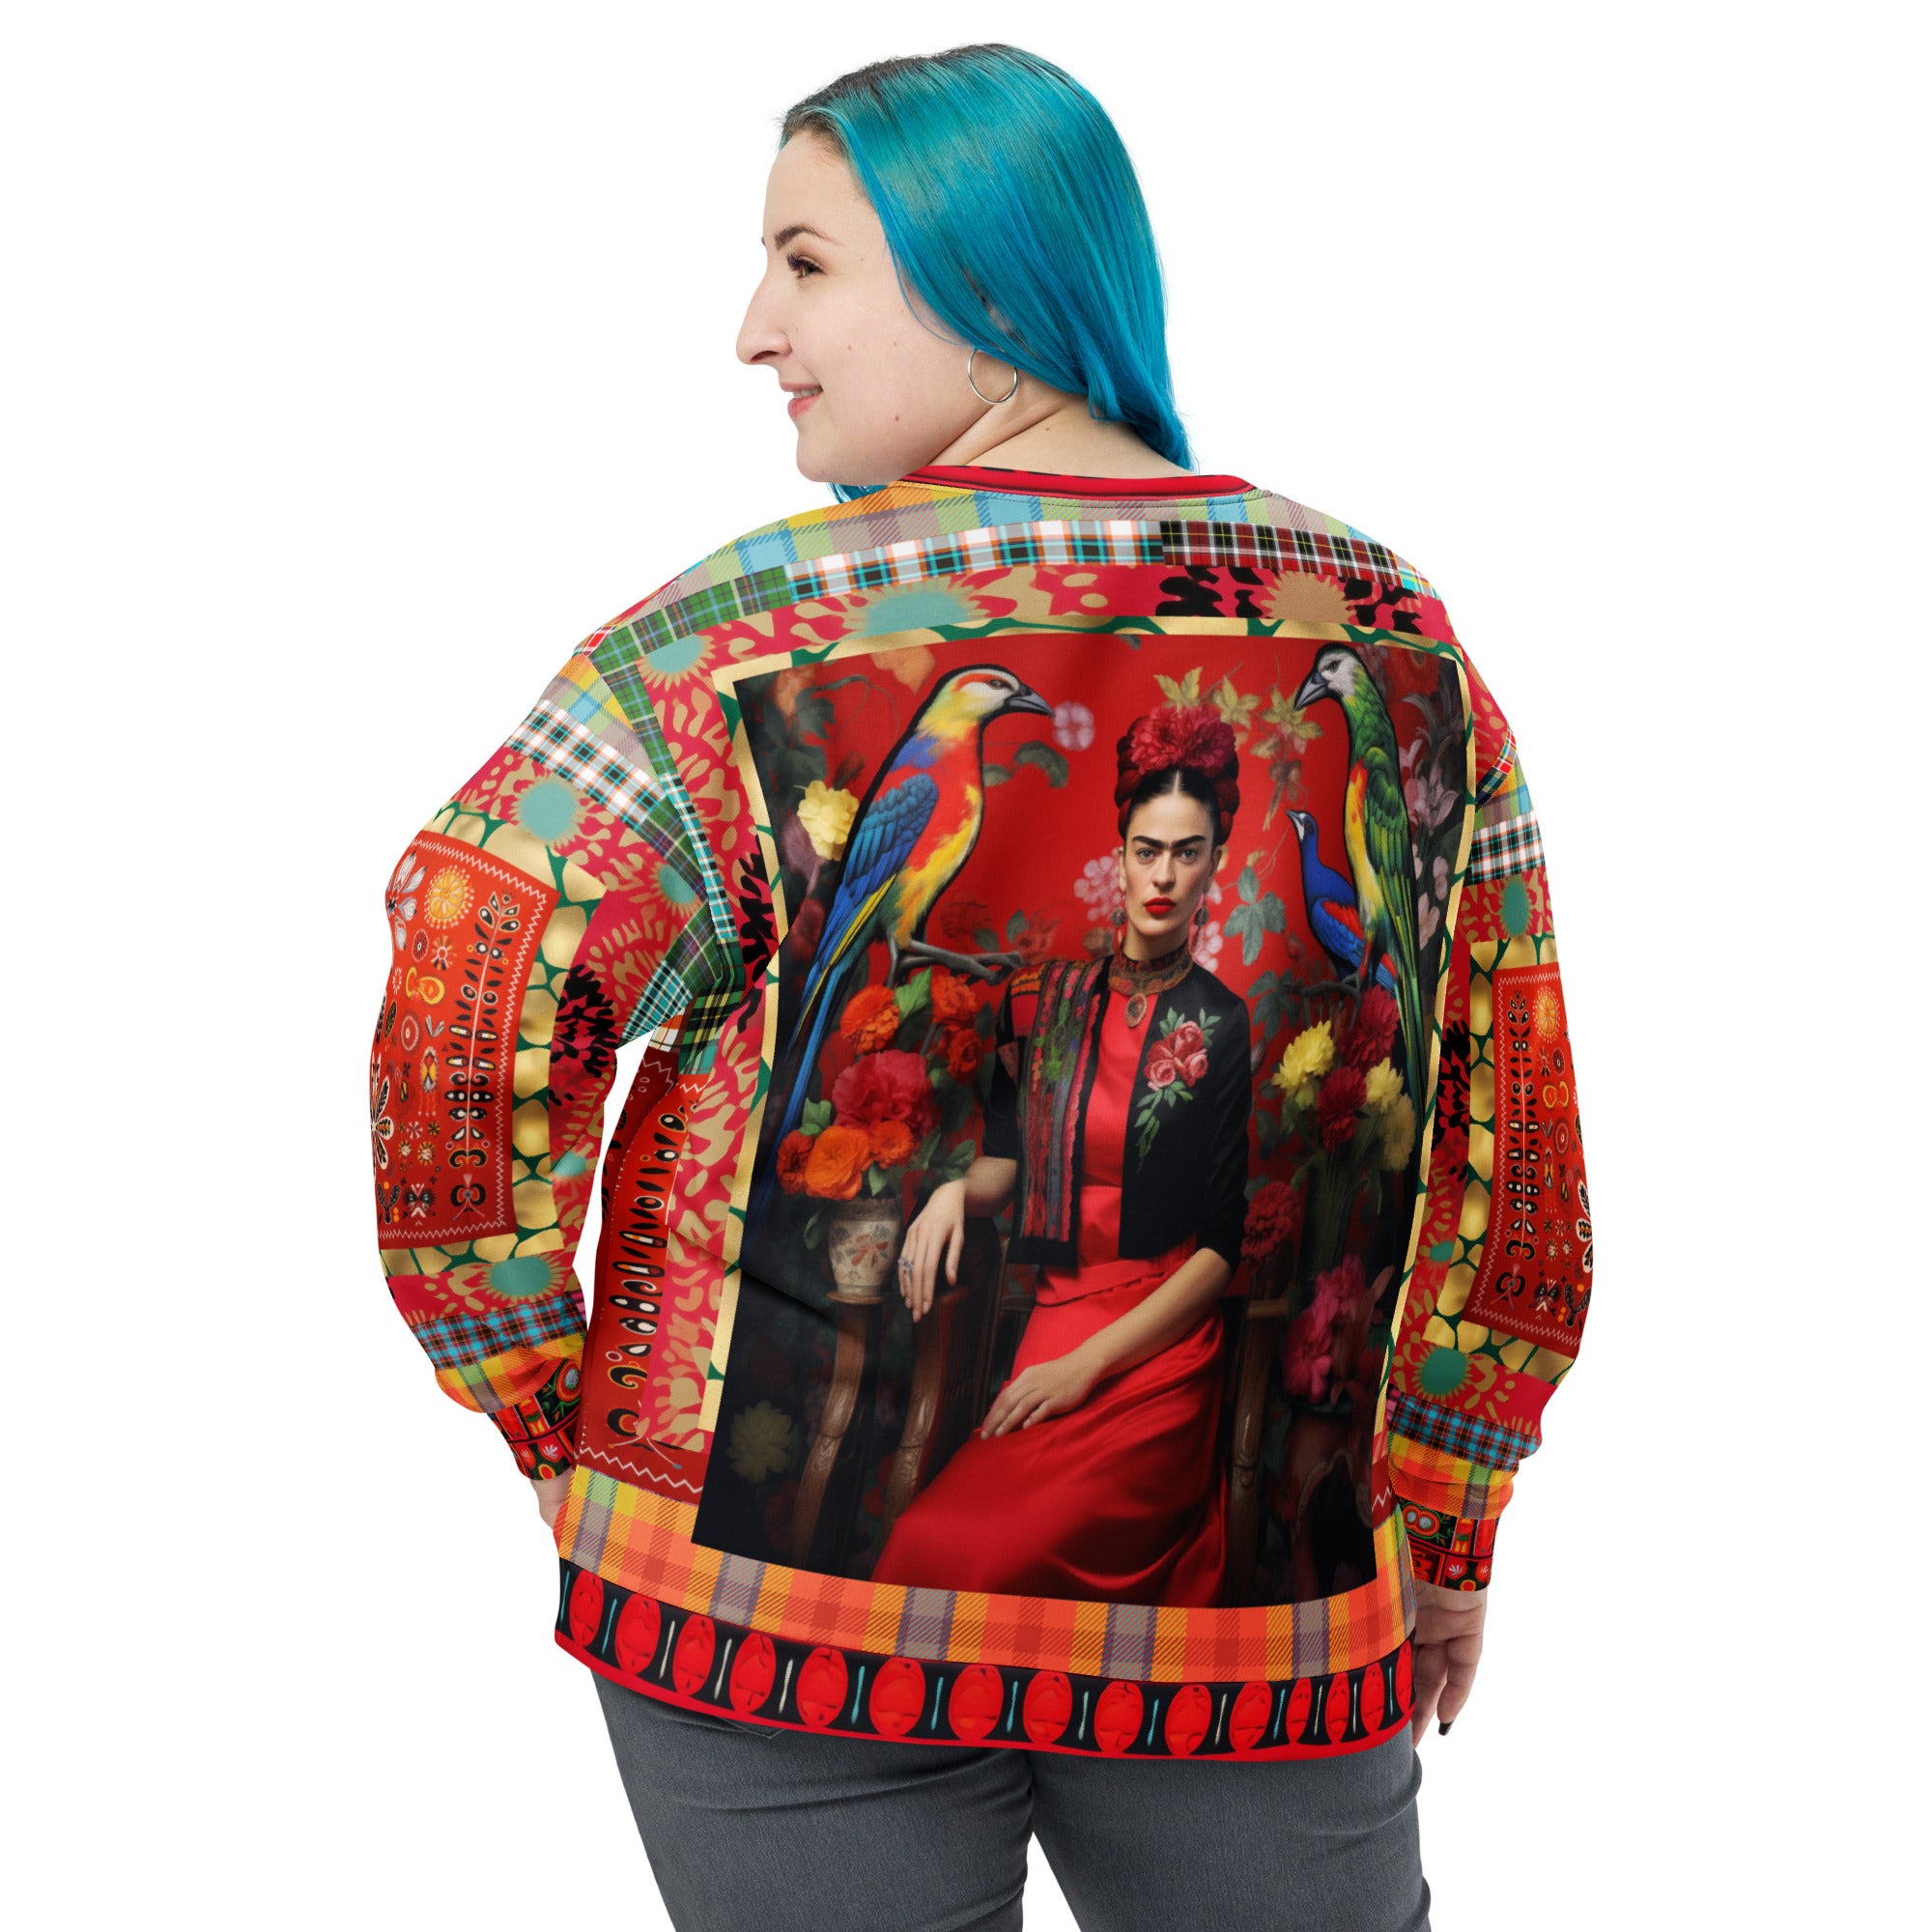 [Frida Kahlo Inspired] Woman in Exotic Bird Floral Eco-Poly Unisex Sweatshirt